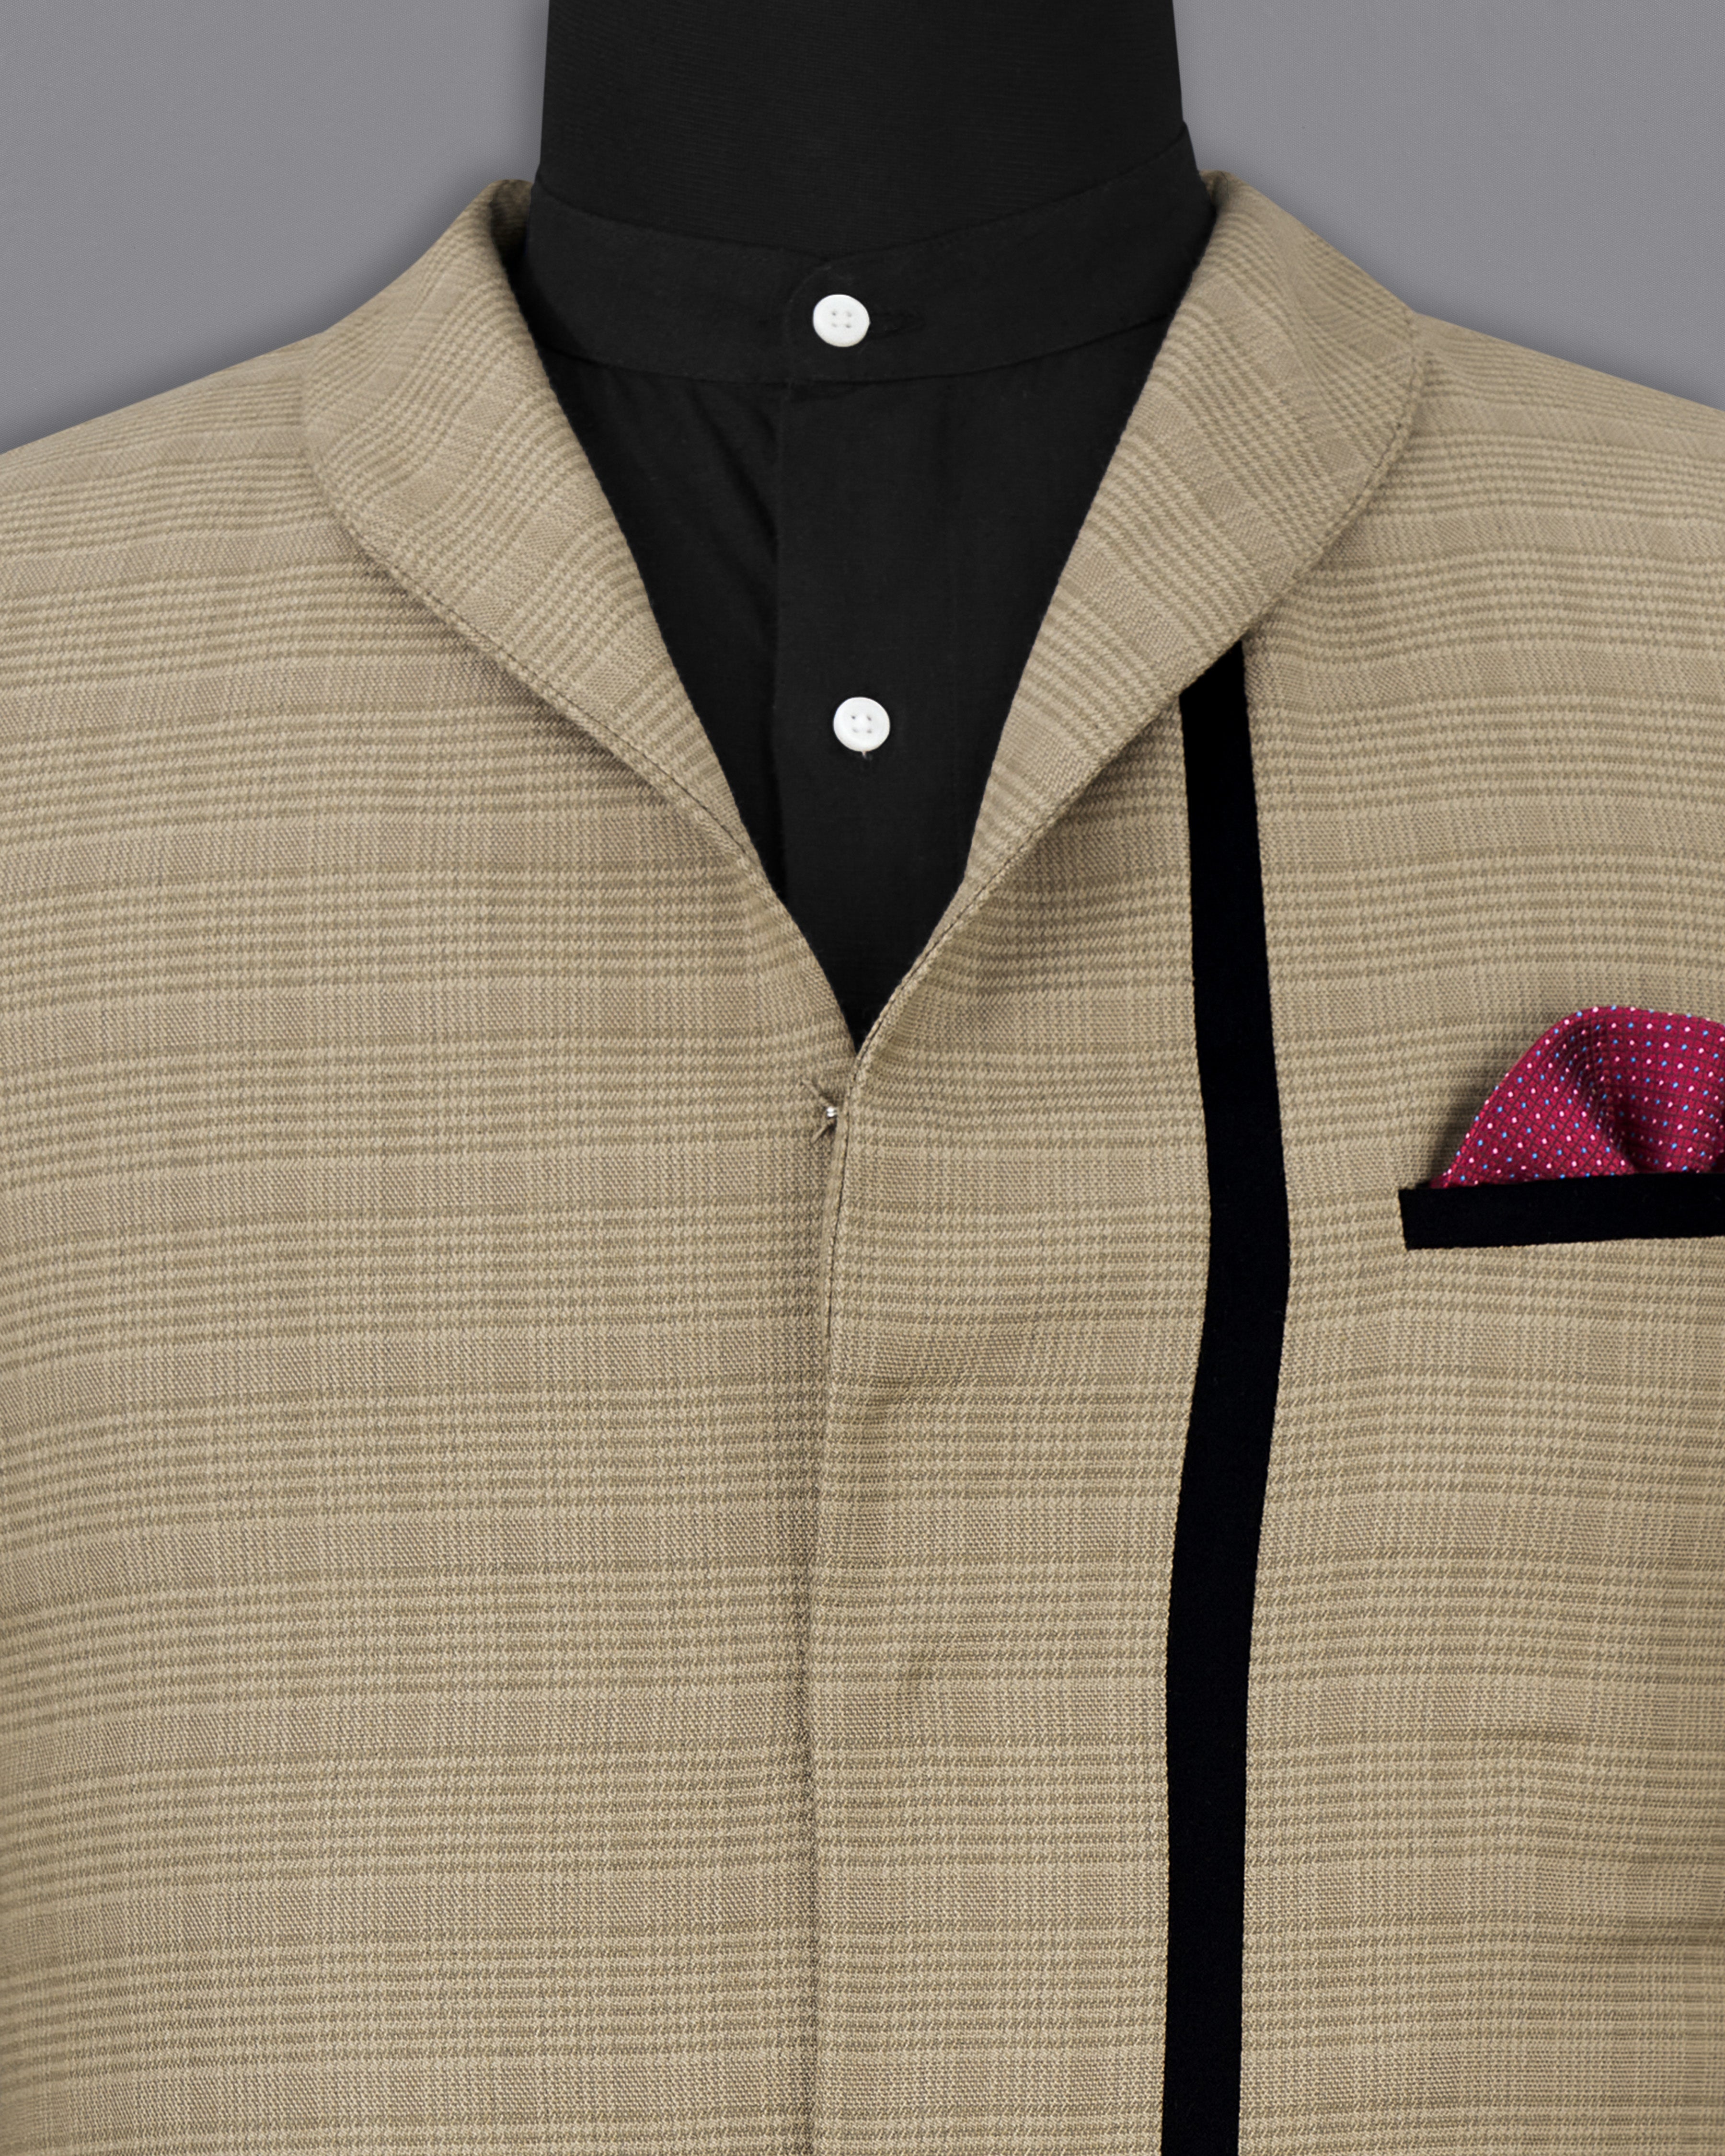 Pale Taupe Brown Plaid with Black Patchwork Wool Rich Blazer BL2511-D20-36, BL2511-D20-38, BL2511-D20-40, BL2511-D20-42, BL2511-D20-44, BL2511-D20-46, BL2511-D20-48, BL2511-D20-50, BL2511-D20-52, BL2511-D20-54, BL2511-D20-56, BL2511-D20-58, BL2511-D20-60